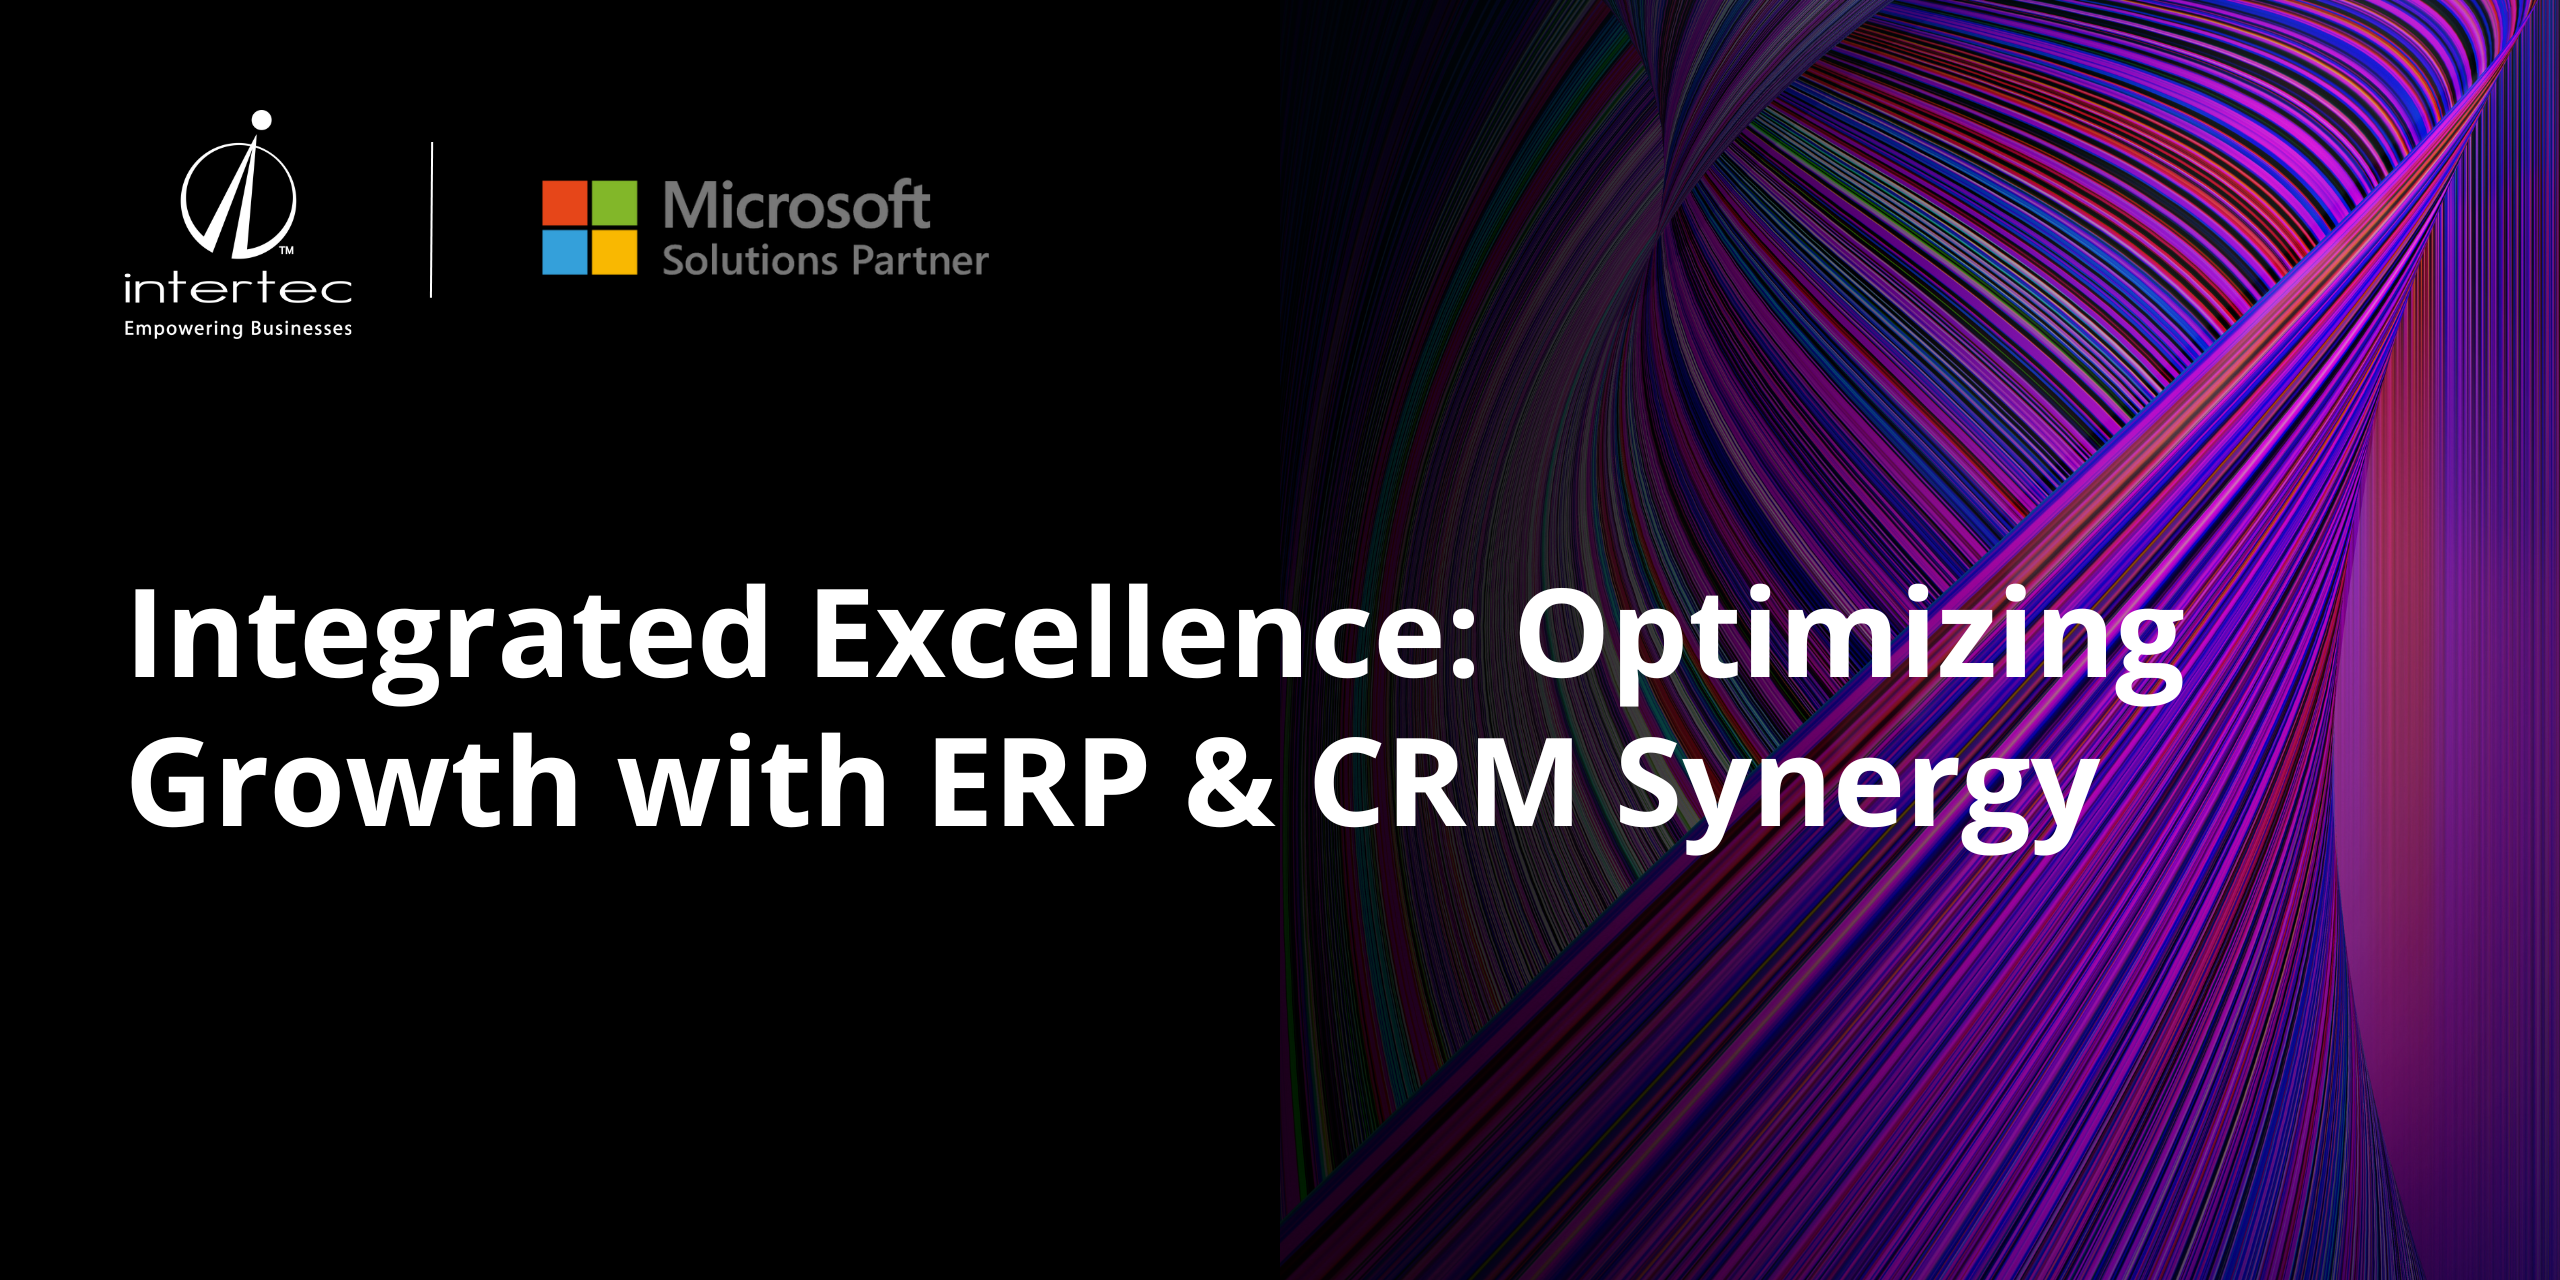 Integrated Excellence: Optimizing Growth with ERP & CRM Synergy